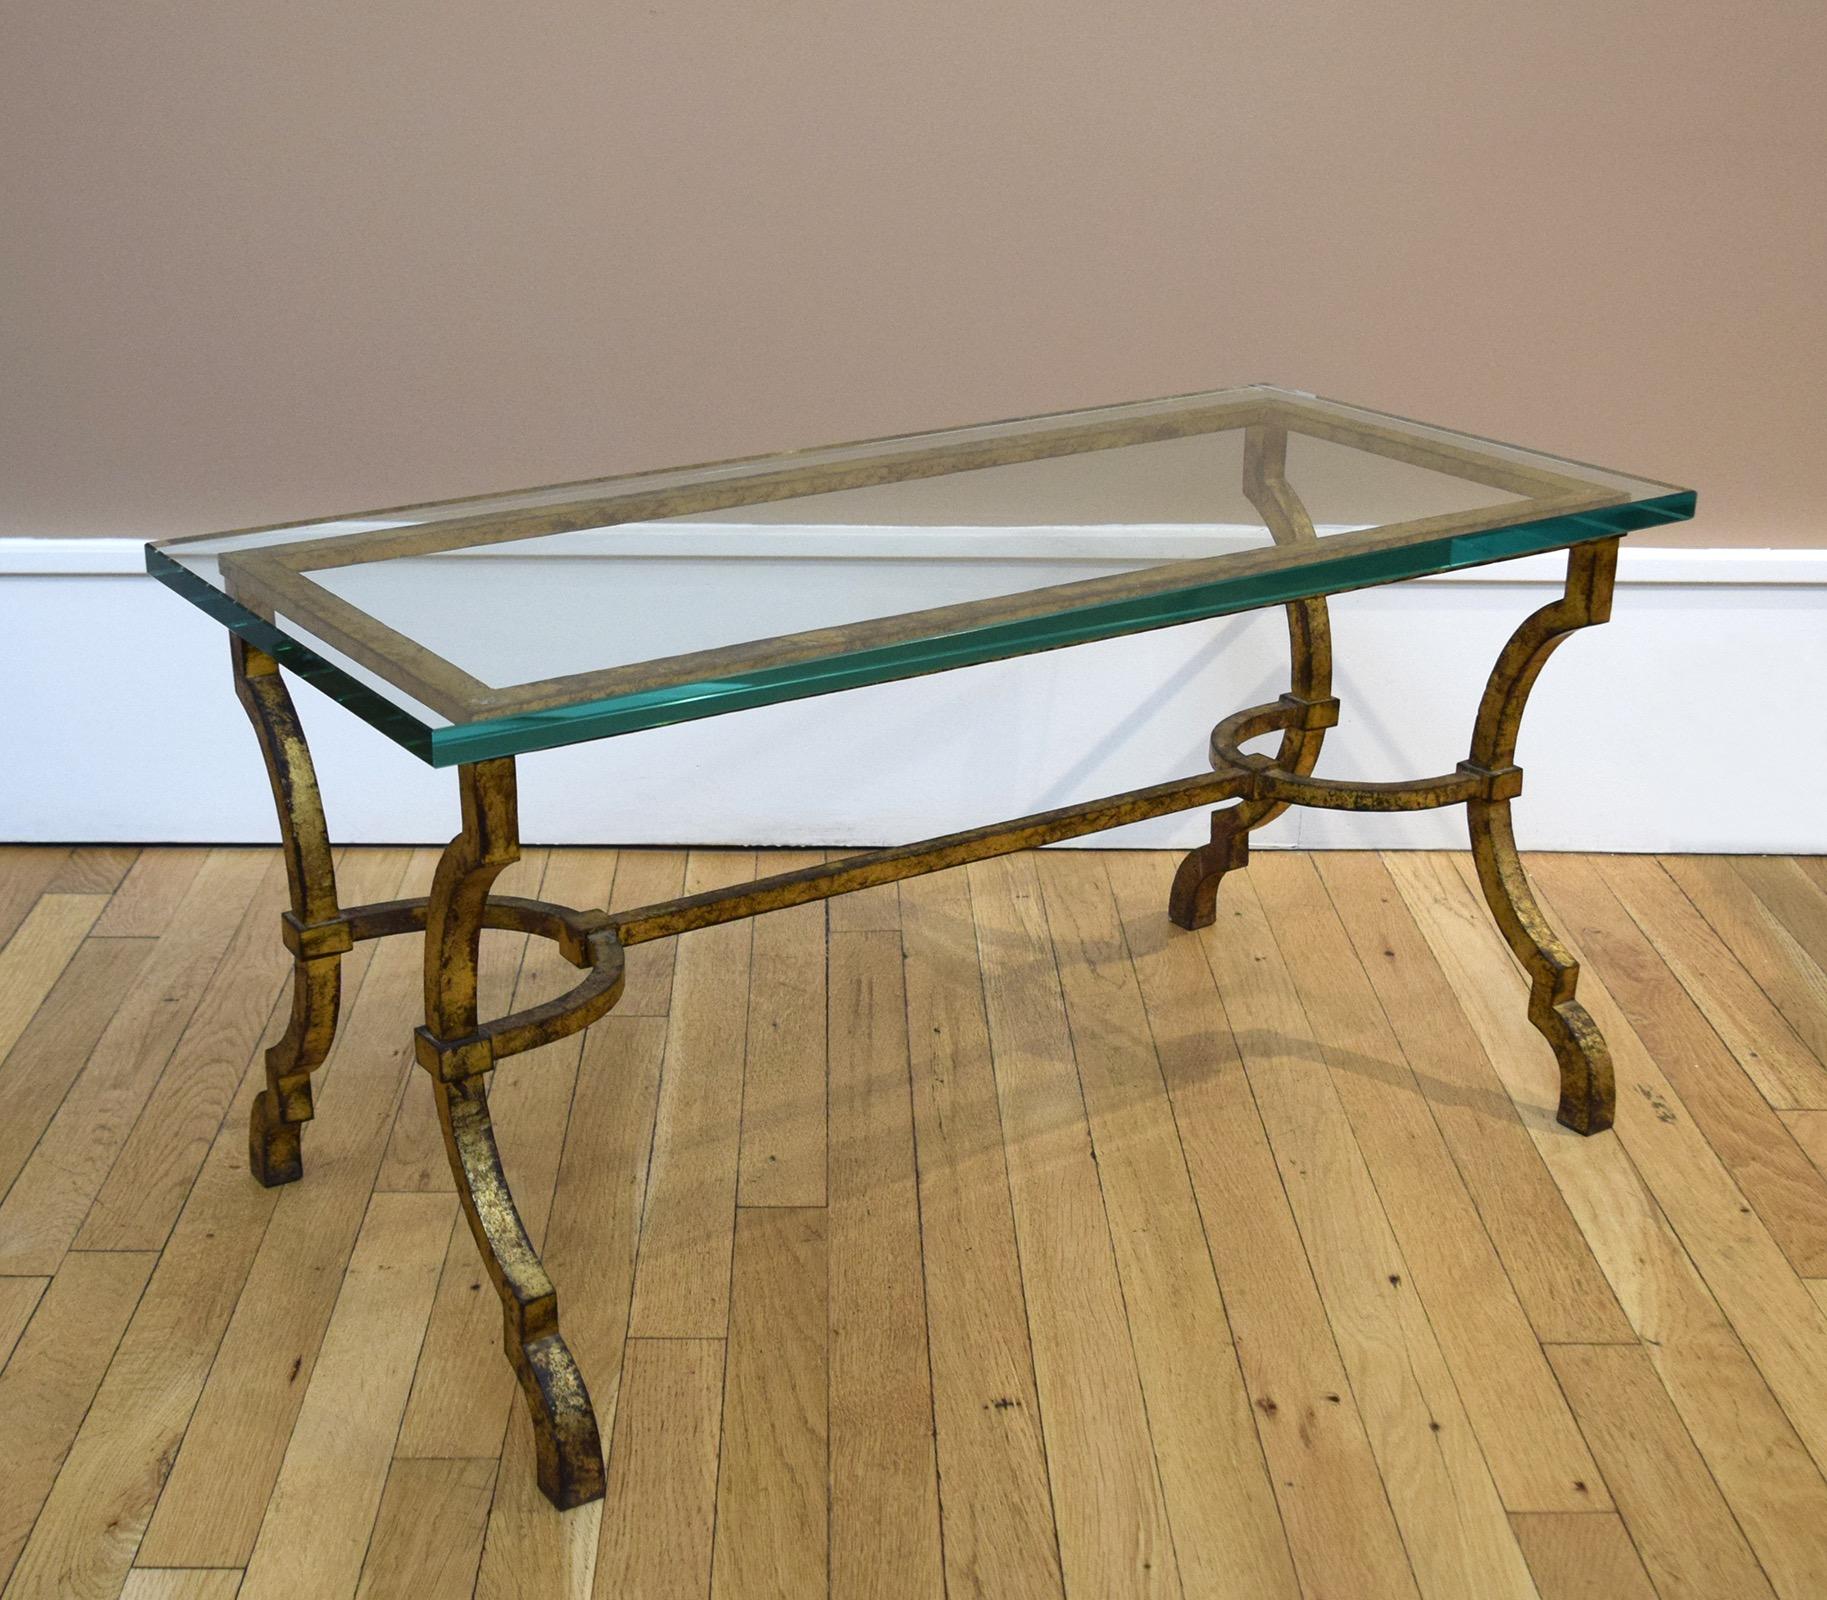 Around 1950 Gilbert Poillerat, the finest metalworker of his day, began supplying the Paris decorating firm of Ramsay with a small line of gilded-wrought-iron tables and standing lamps. Poillerat was then working in an updated Baroque style,